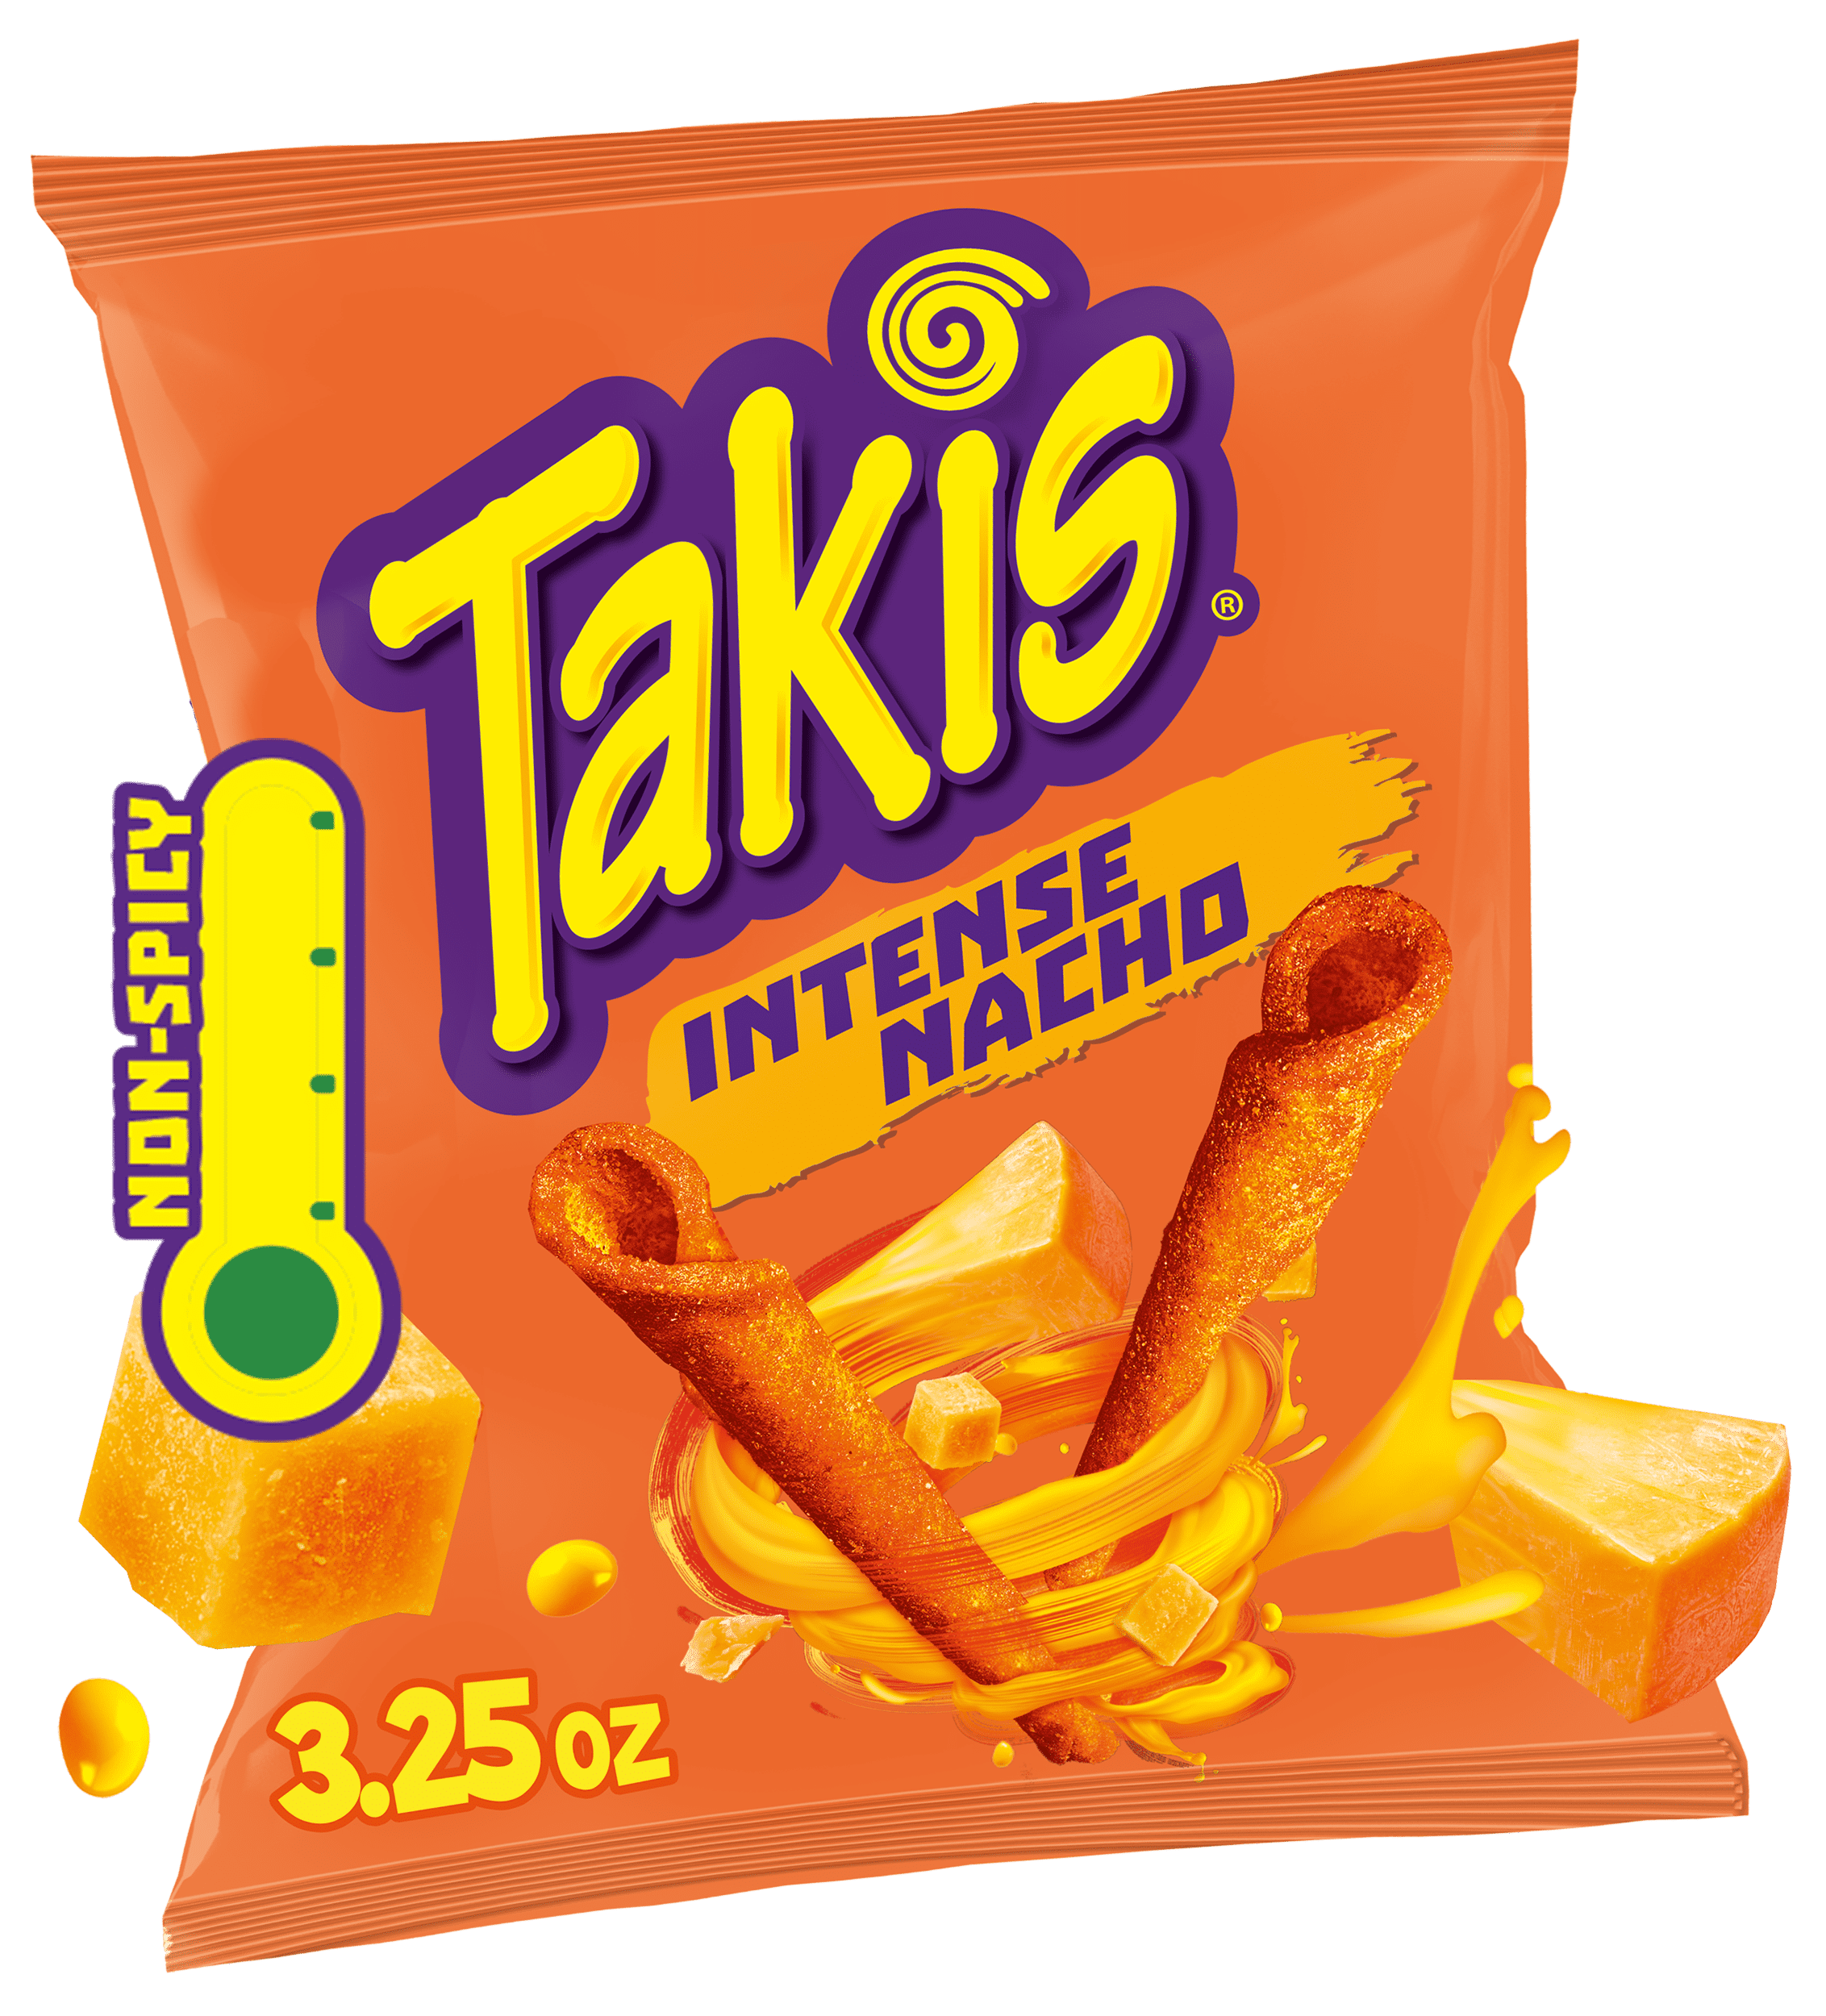 Takis Intense Nacho 3.25 oz Snack Size Bag, Cheese Rolled Tortilla Chips